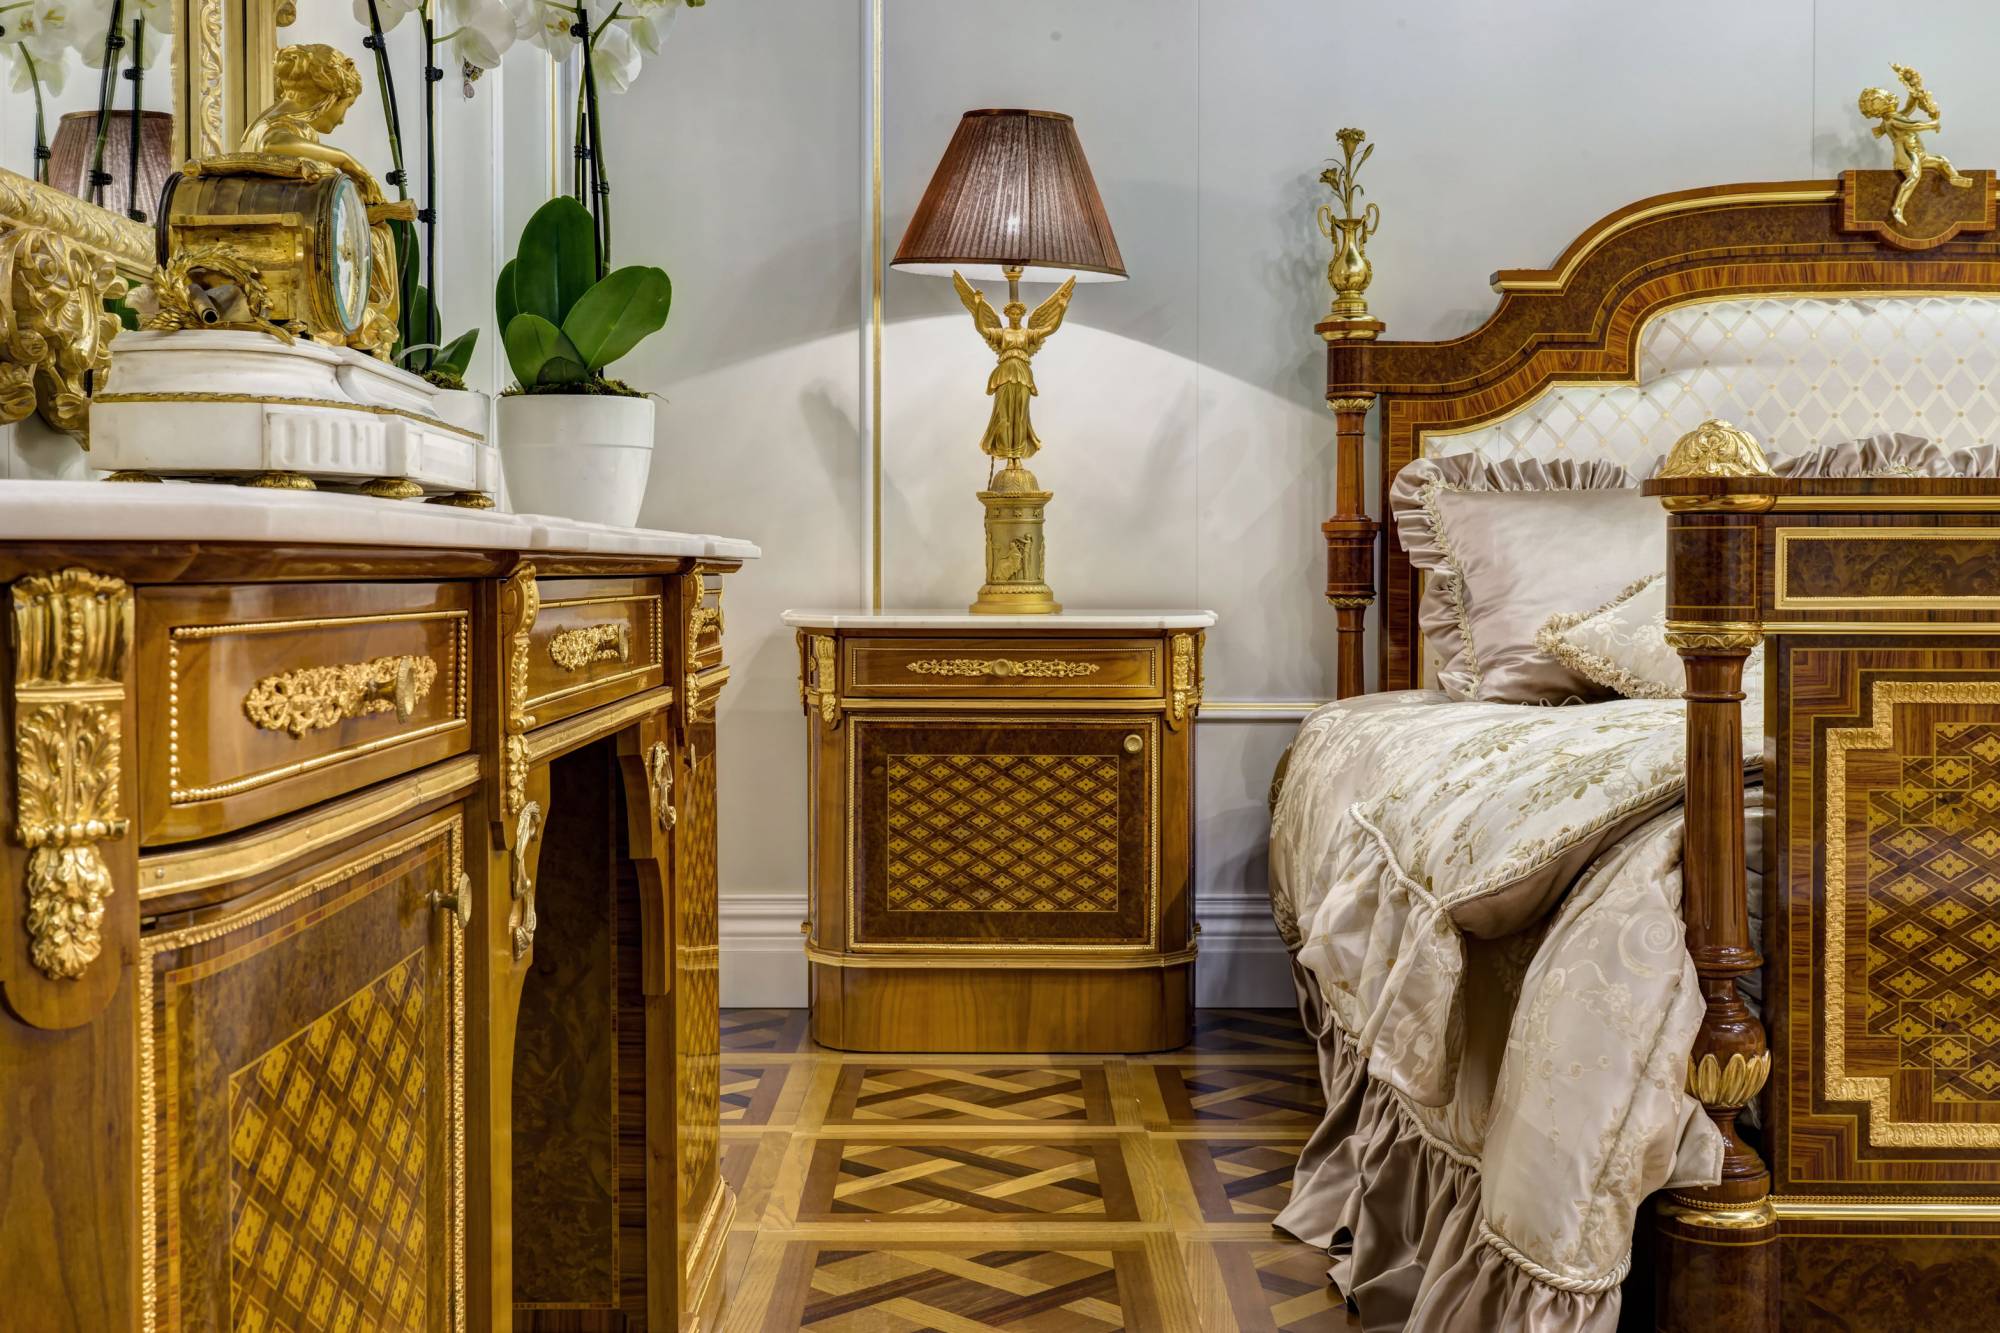 ART. 2089 – The elegance of luxury classic Bedside tables made in Italy by C.G. Capelletti.